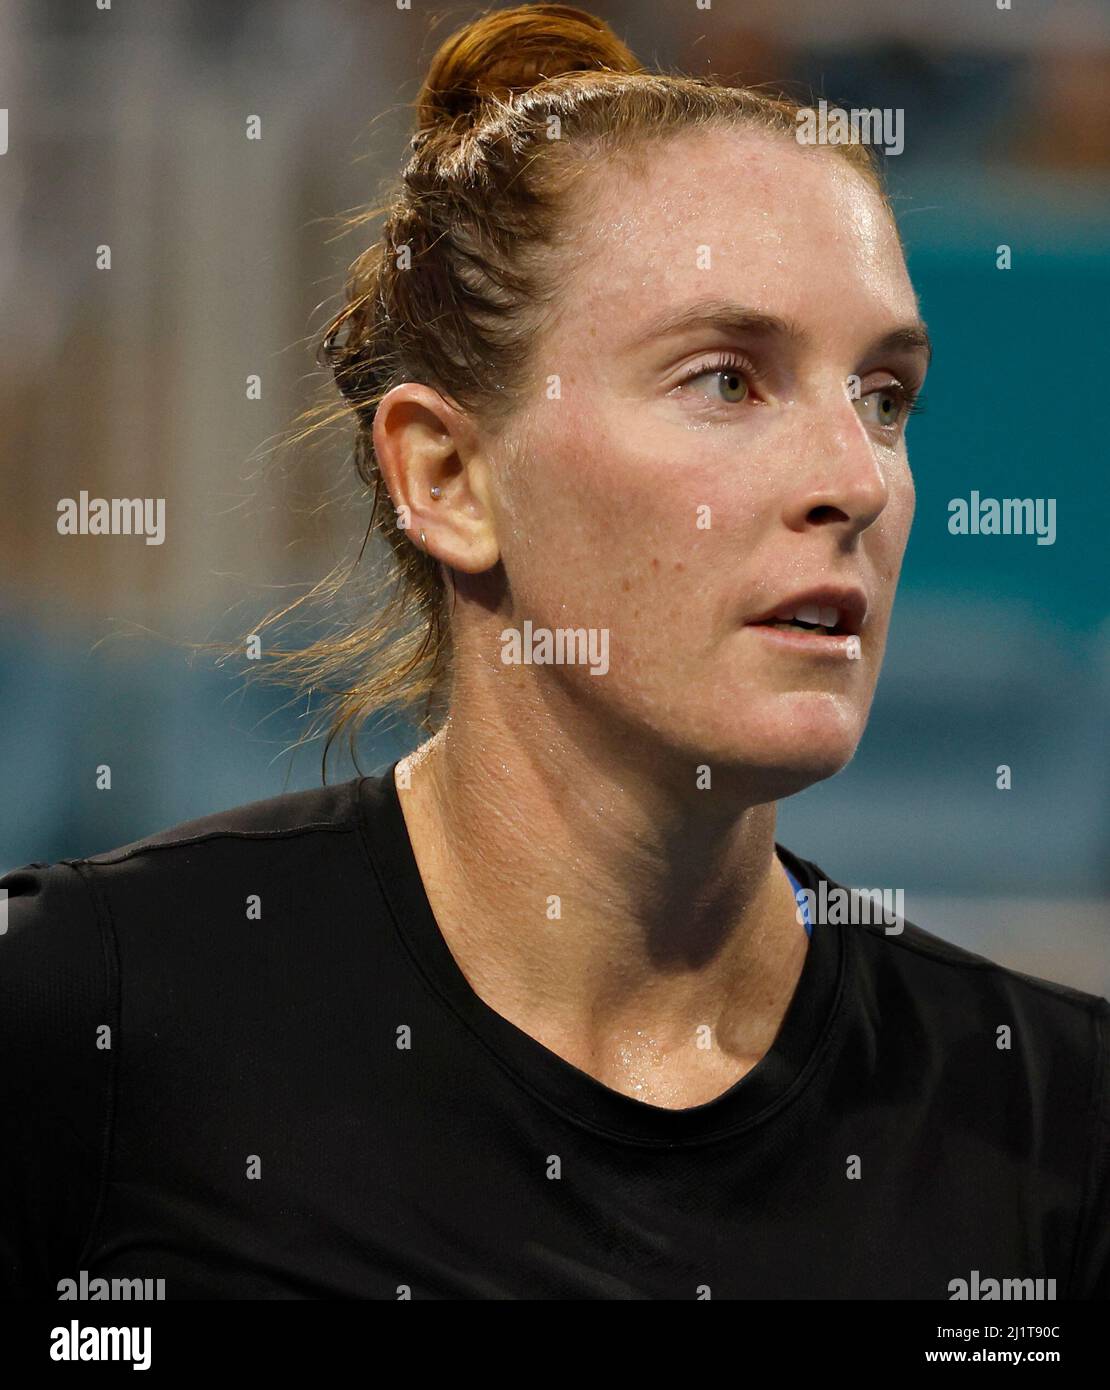 Miami Gardens, Florida, USA. 27th Mar, 2022. Iga Swiatek of Poland defeats Madison Brengle of United States during the 2022 Miami Open presented by Itaú at Hard Rock Stadium on March 27, 2022 in Miami Gardens, Florida People: Madison Brengle Credit: Hoo Me/Media Punch/Alamy Live News Stock Photo